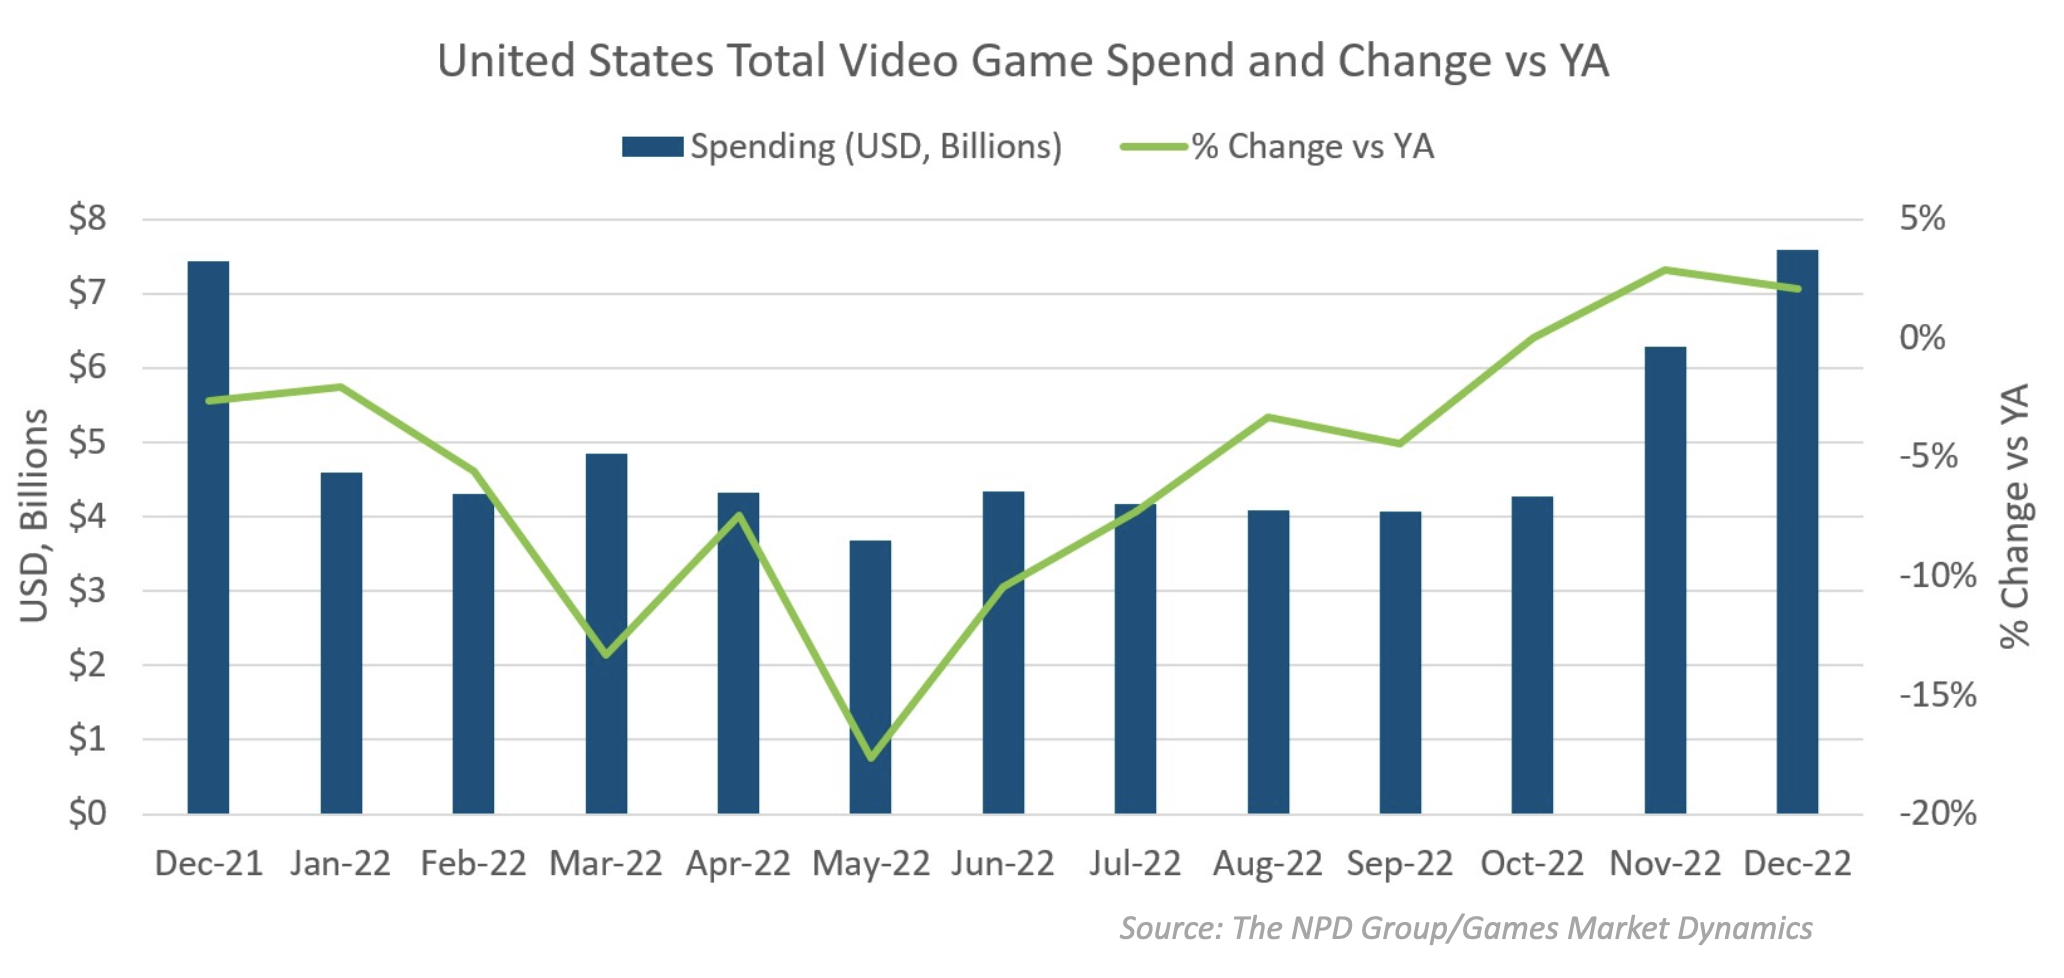 Inflation hits gaming hard, 2022 global games revenues drop over